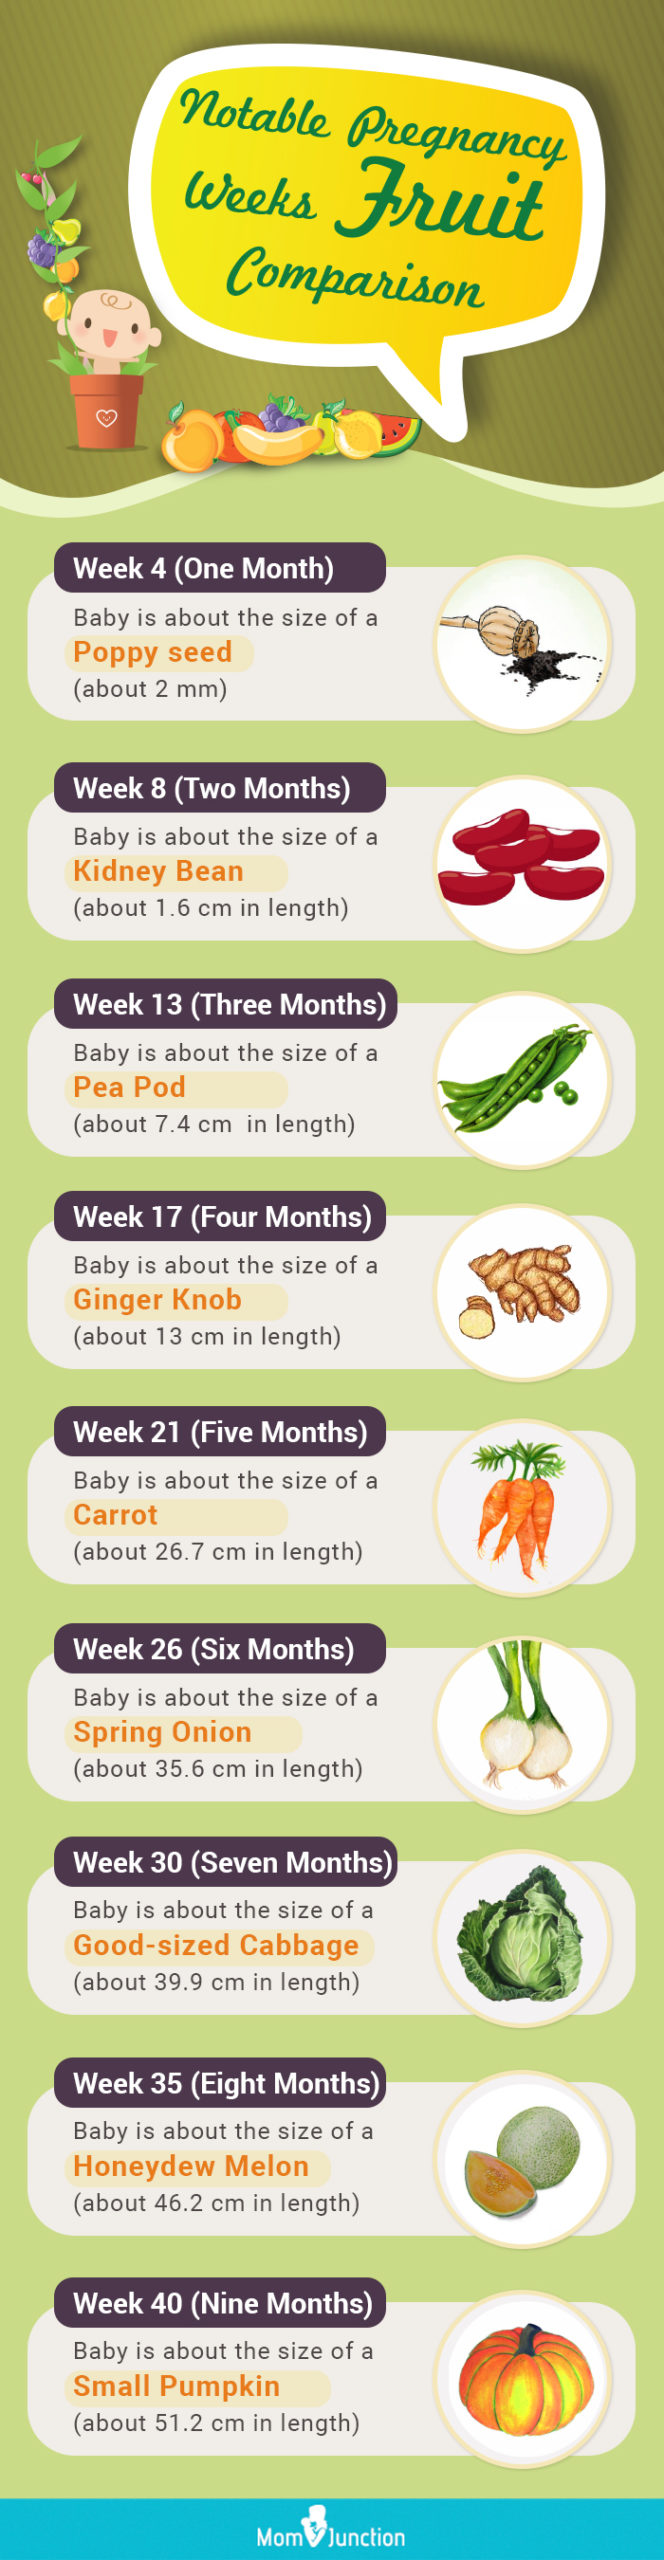 how big is your baby week by week fruit comparison (infographic)